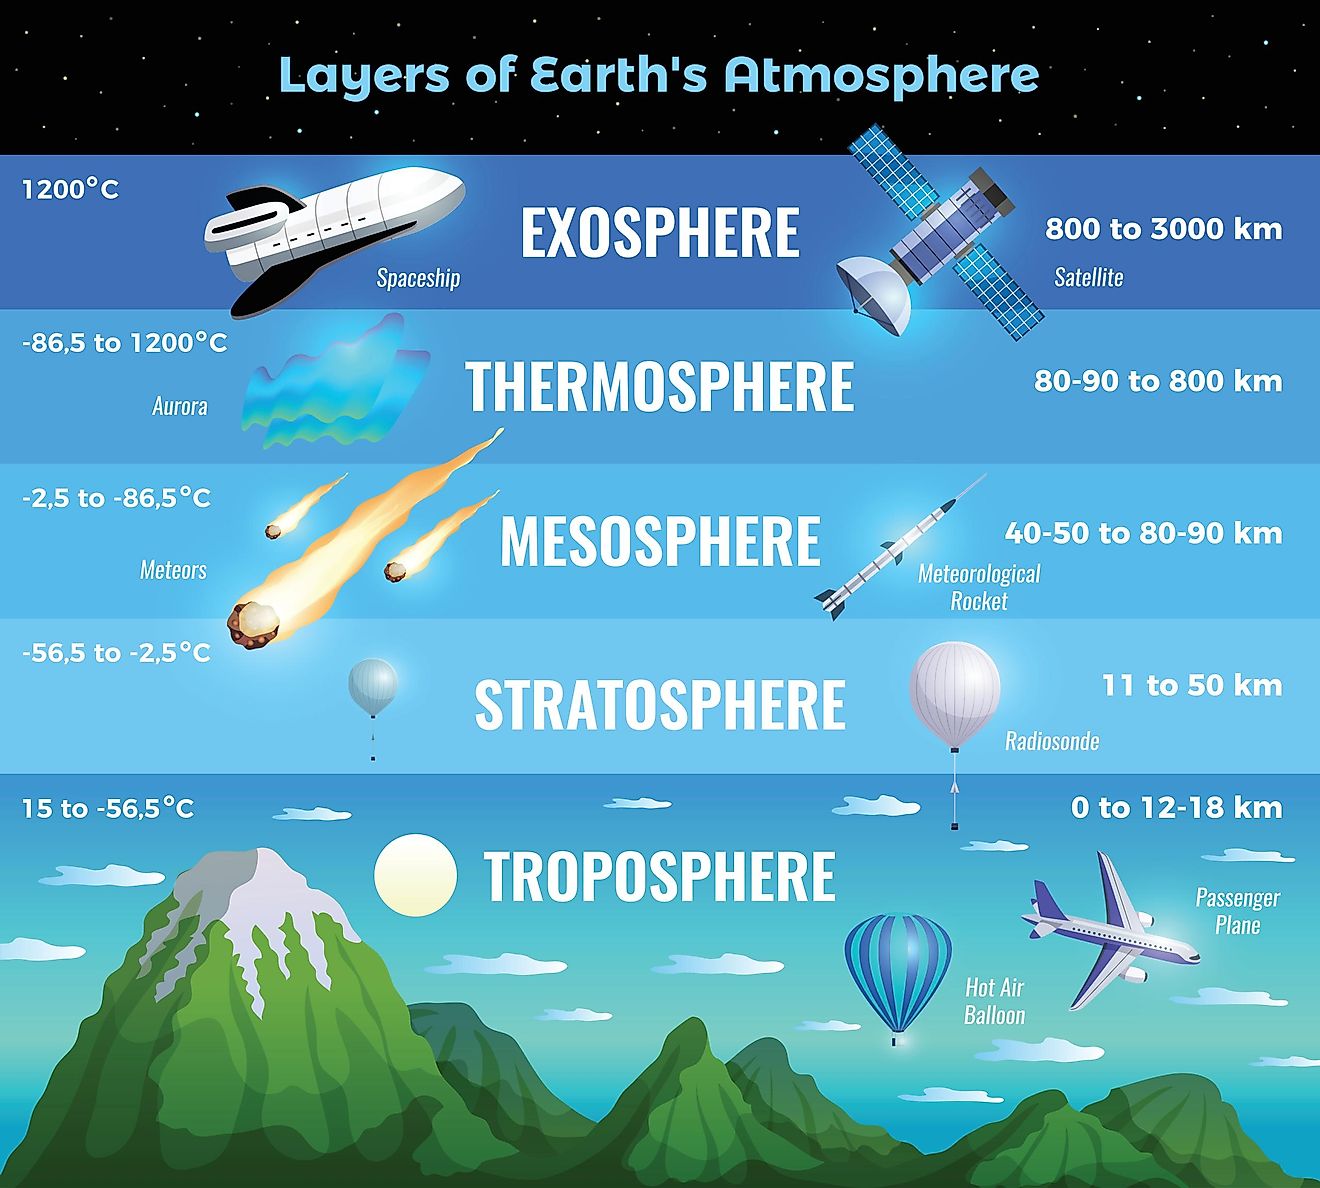 What Are The 3 Atmosphere Layers